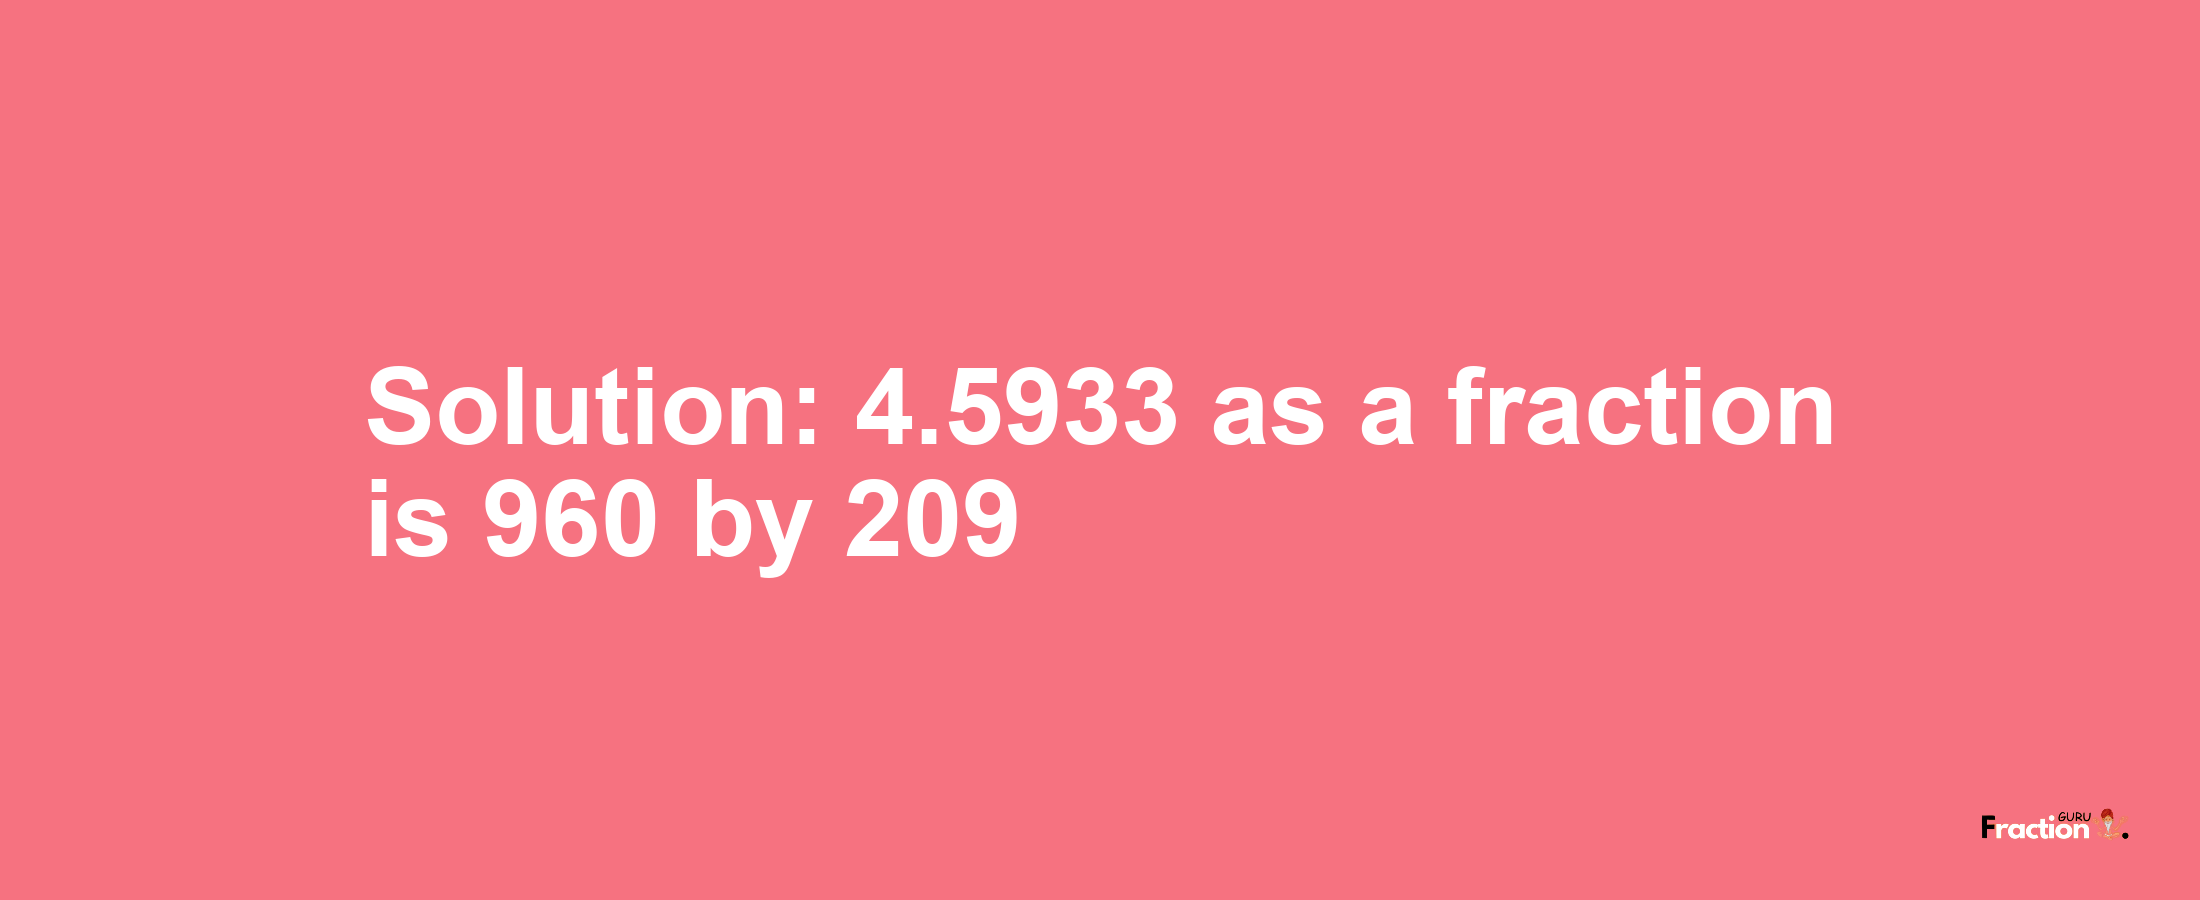 Solution:4.5933 as a fraction is 960/209